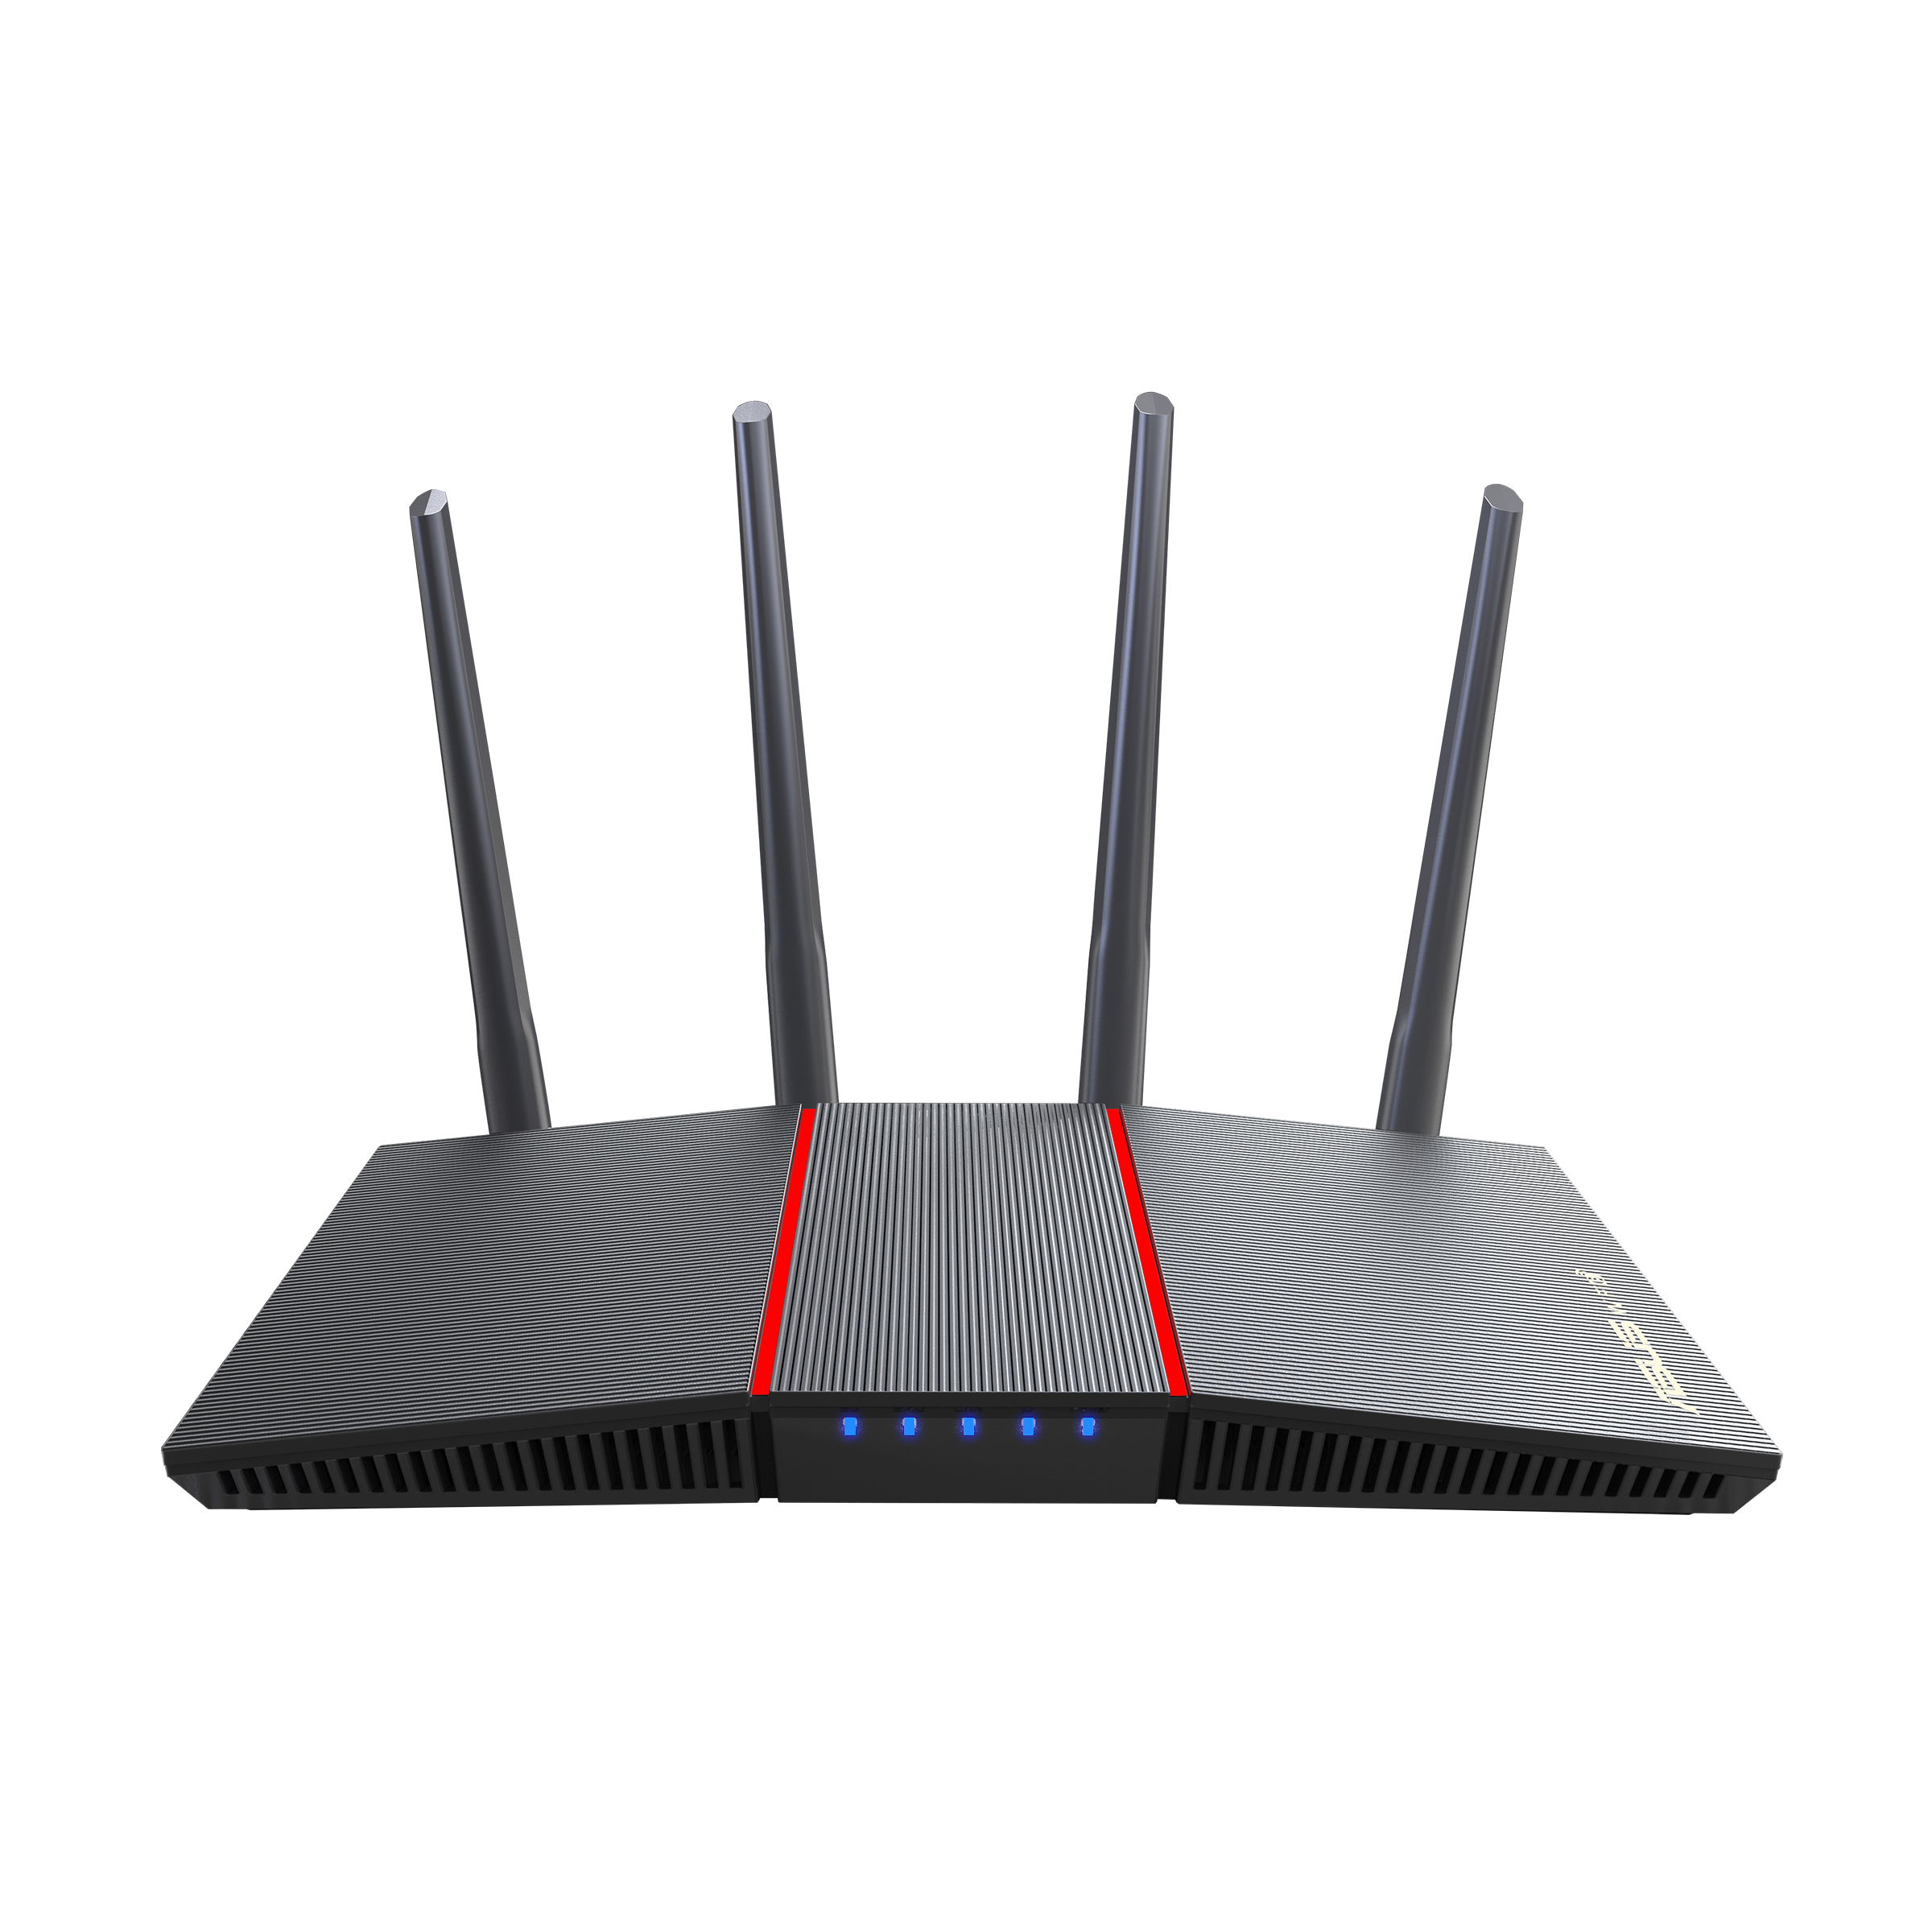 RT-AX55｜WiFi Routers｜ASUS Global